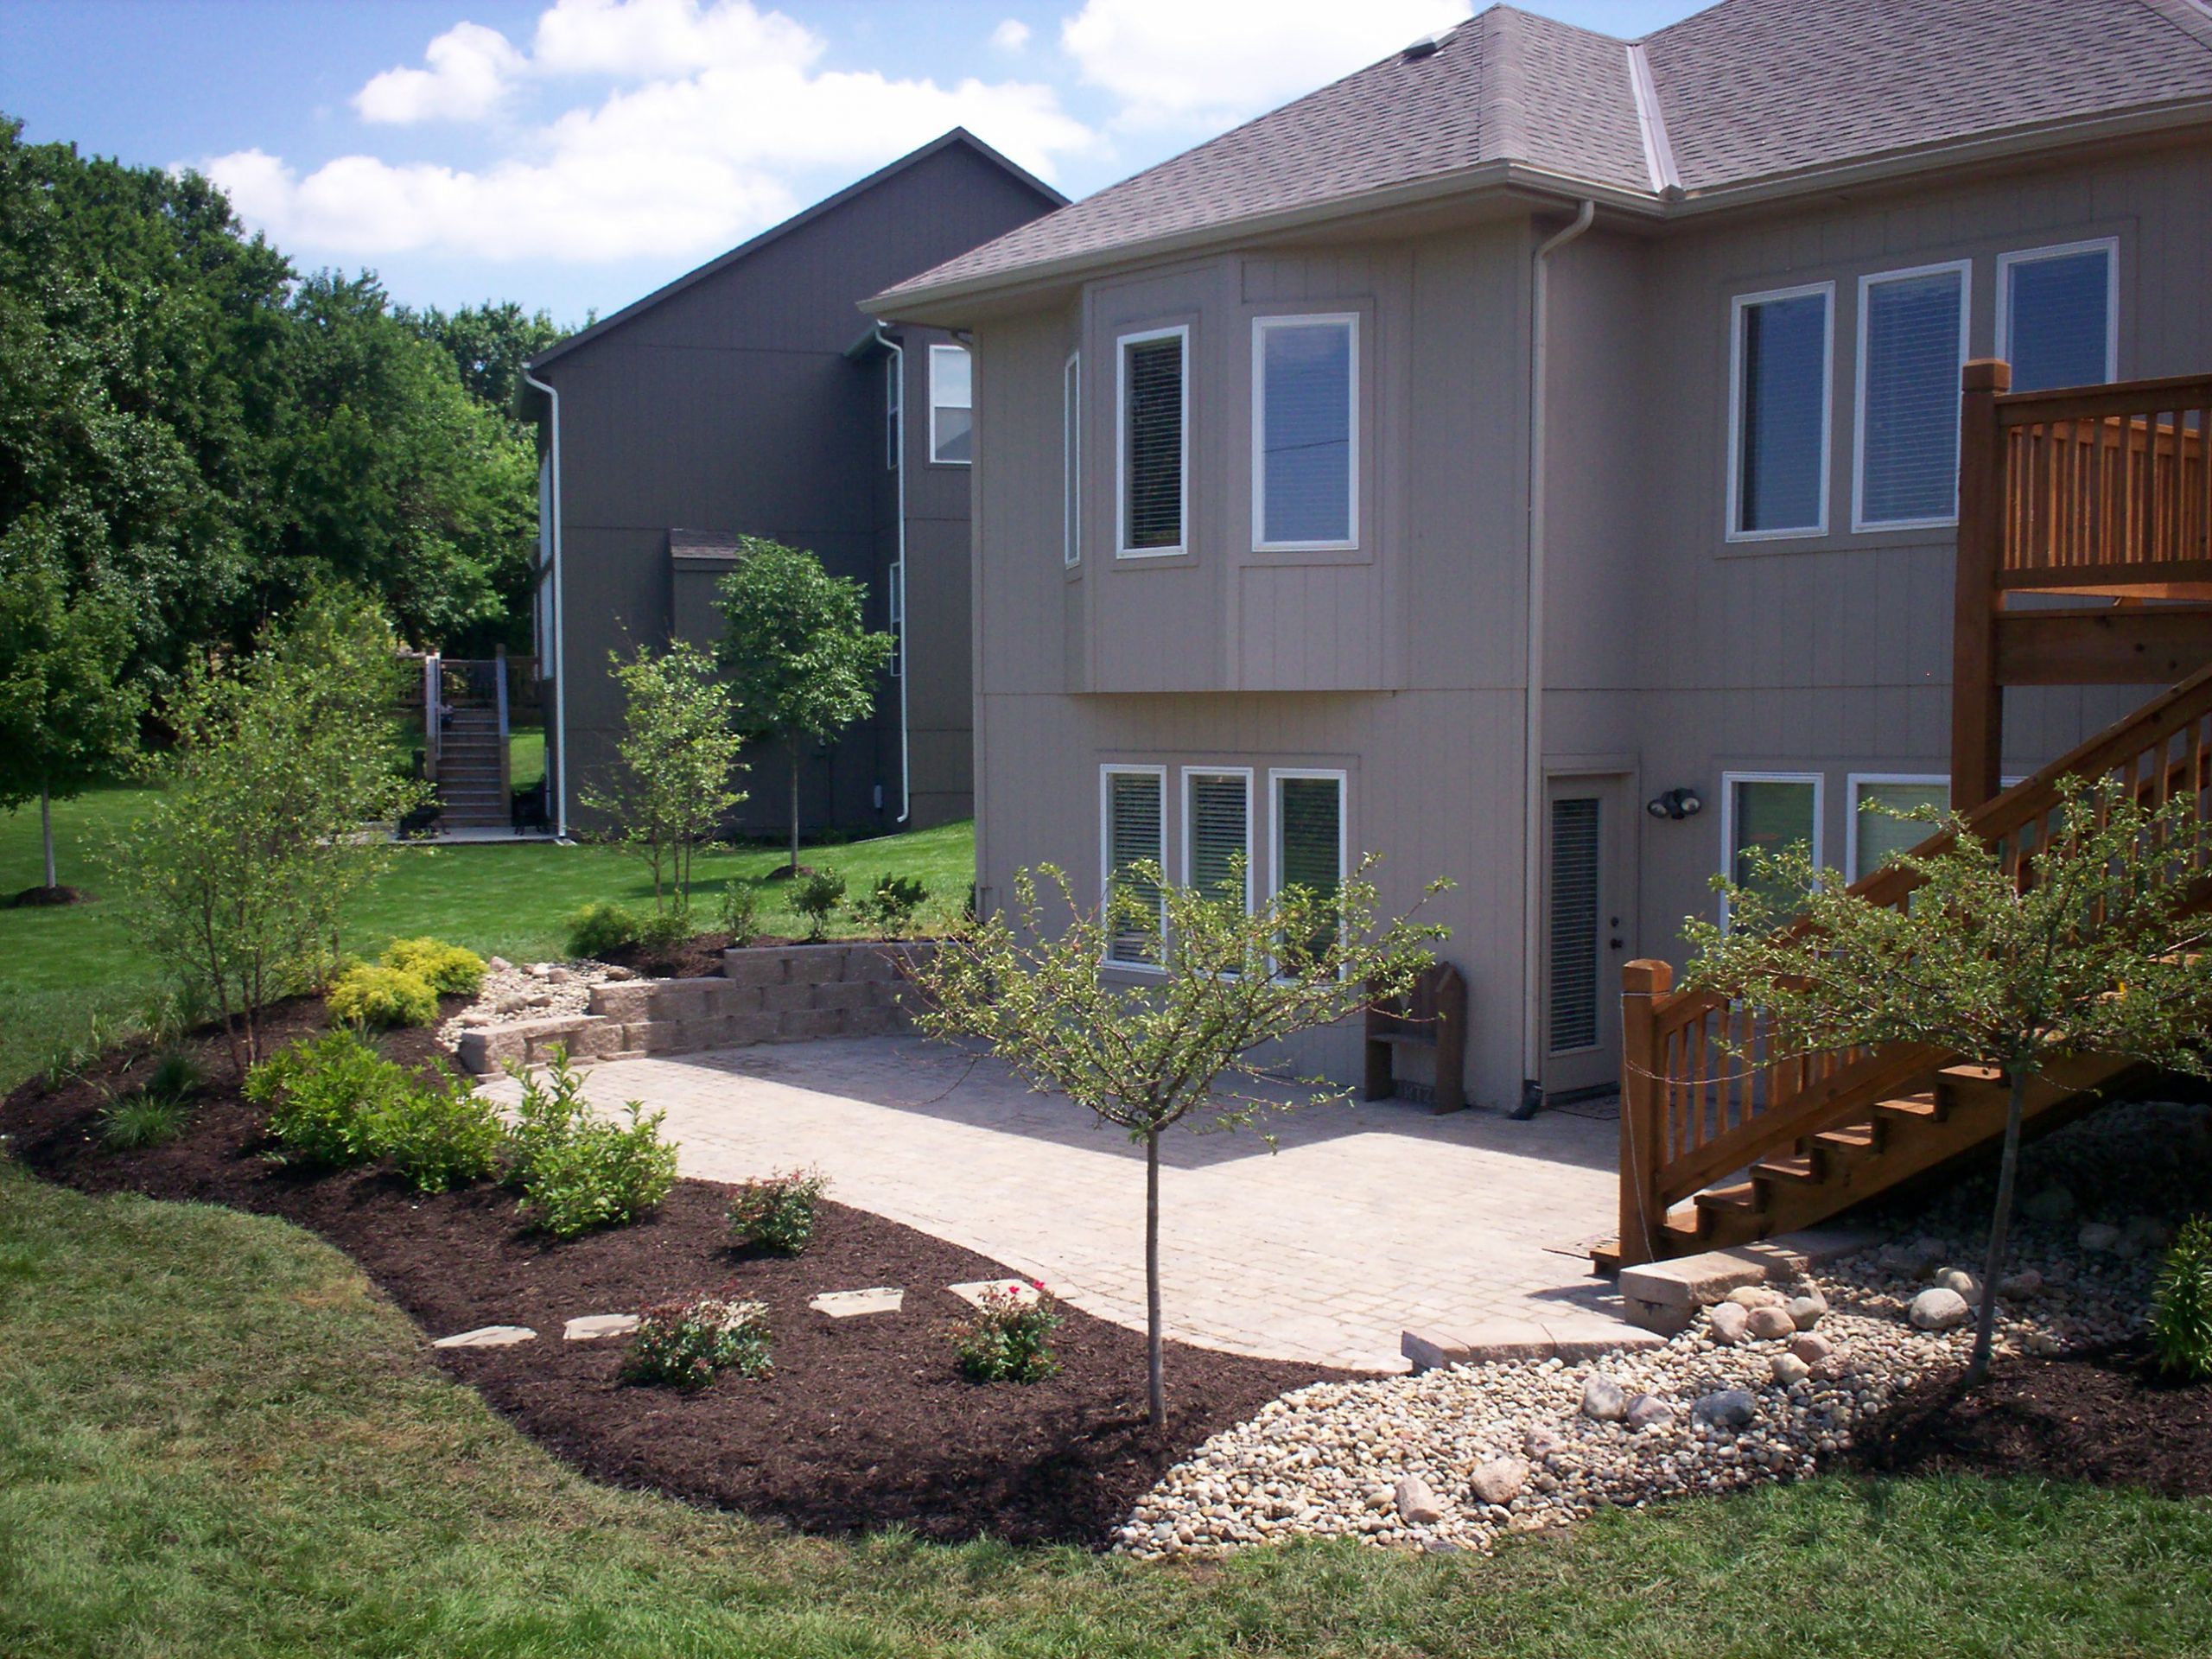 Landscaping Around Concrete Patio
 Patios and Retaining Walls